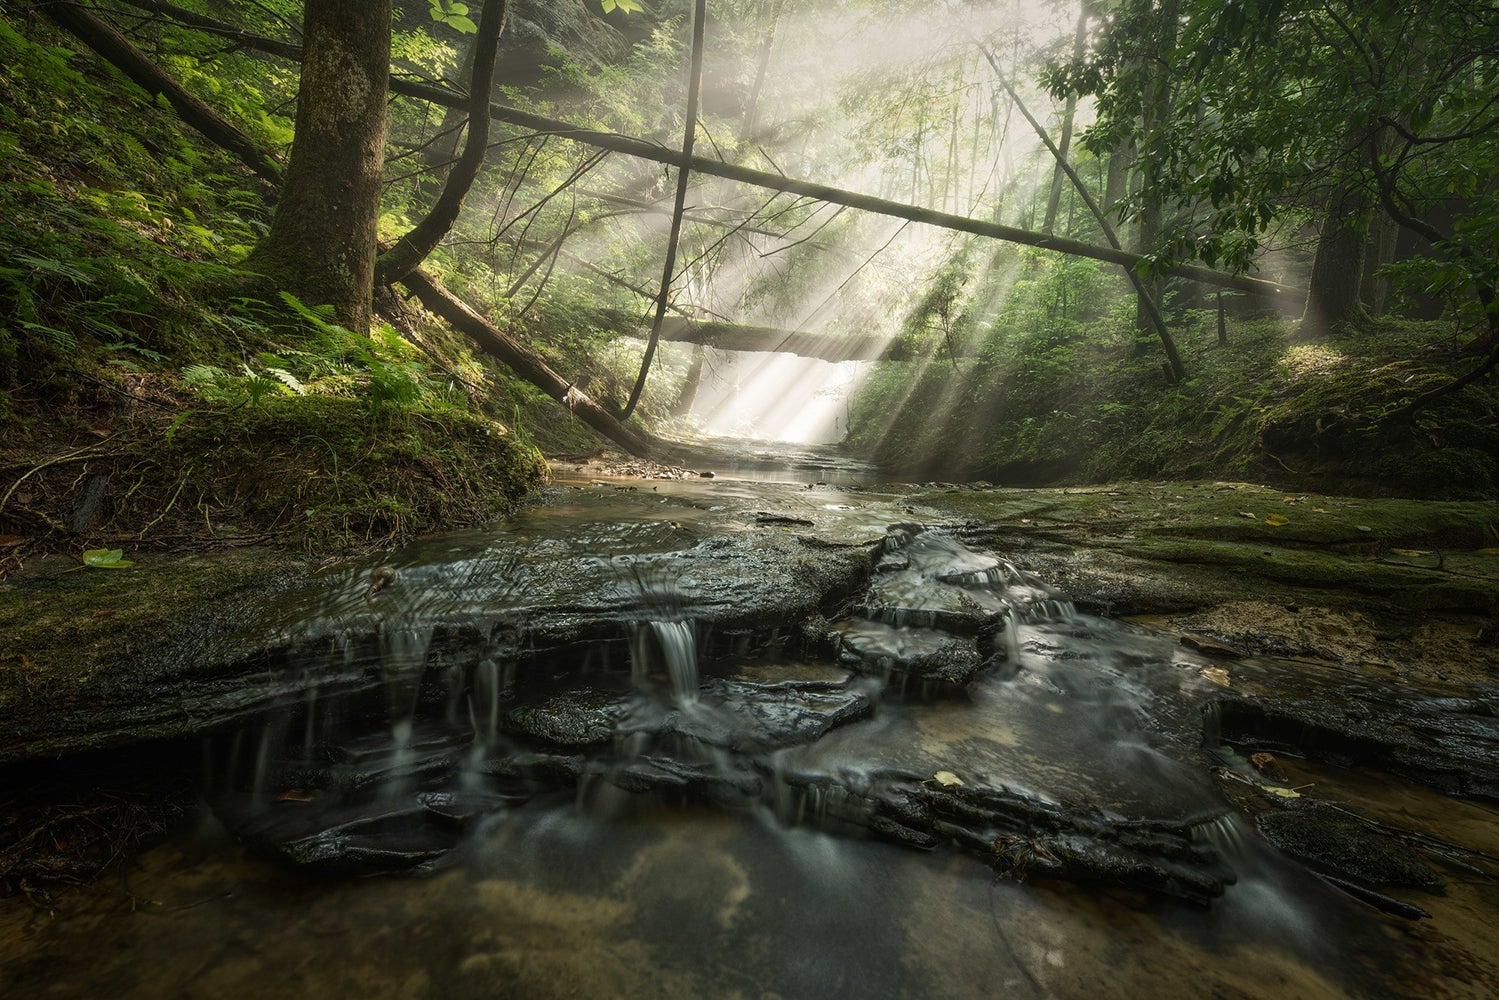 Keith Bozeman took 1st Place in the Scenic Category of the 2021 Outdoor Alabama Photo Contest with his image of Canyon Cascade in the Bankhead National Forest.